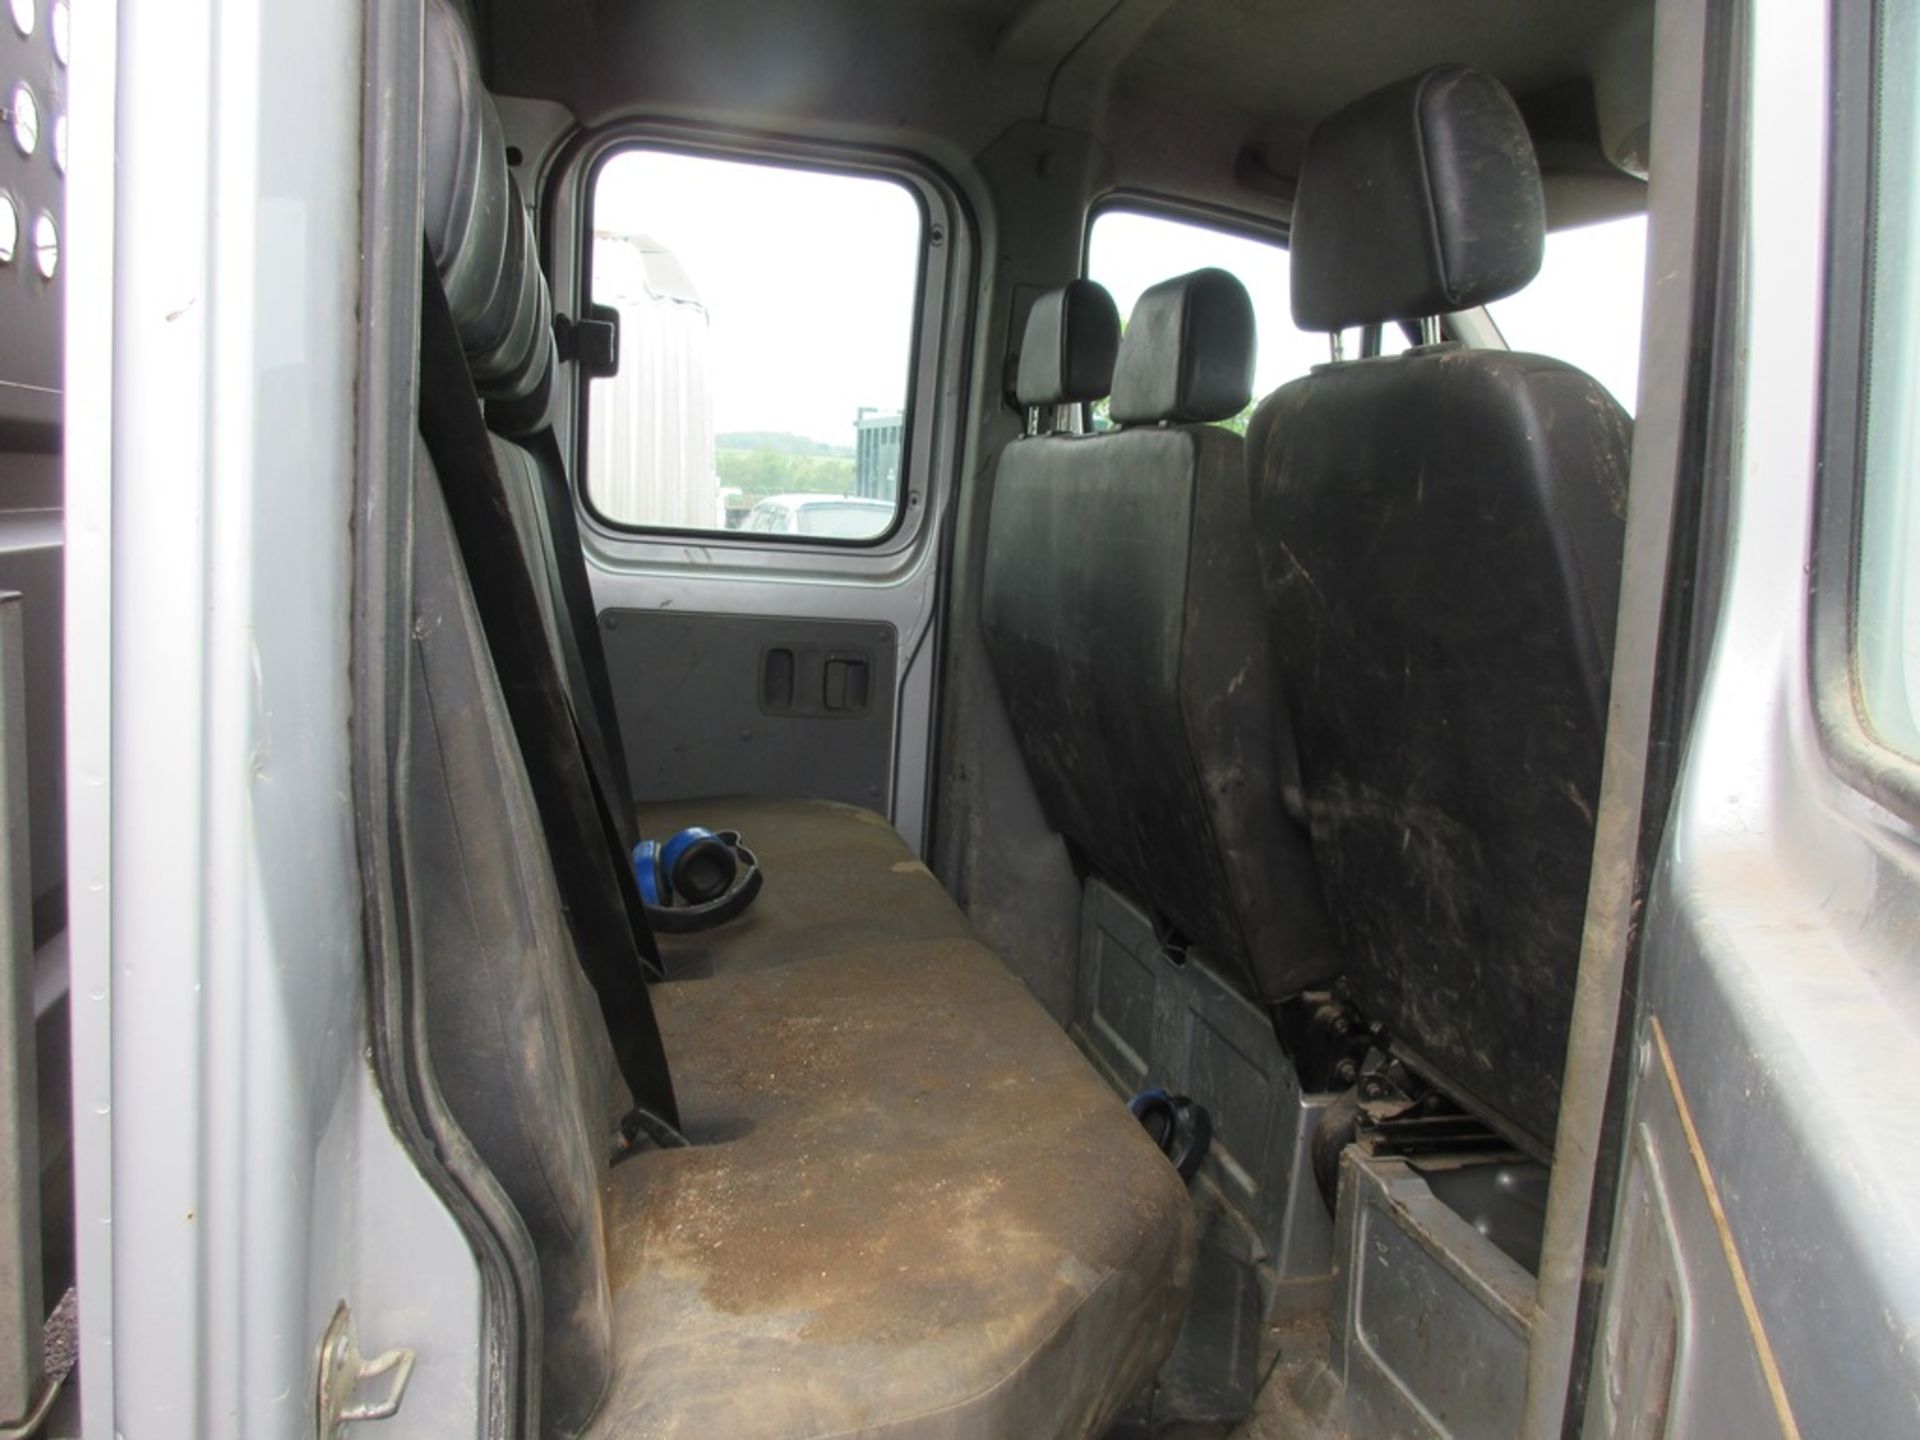 Volkswagen Crafter CR35 2.0 TDI Double Cab Tipper, 134bhp (29/04/2016) - Image 15 of 18